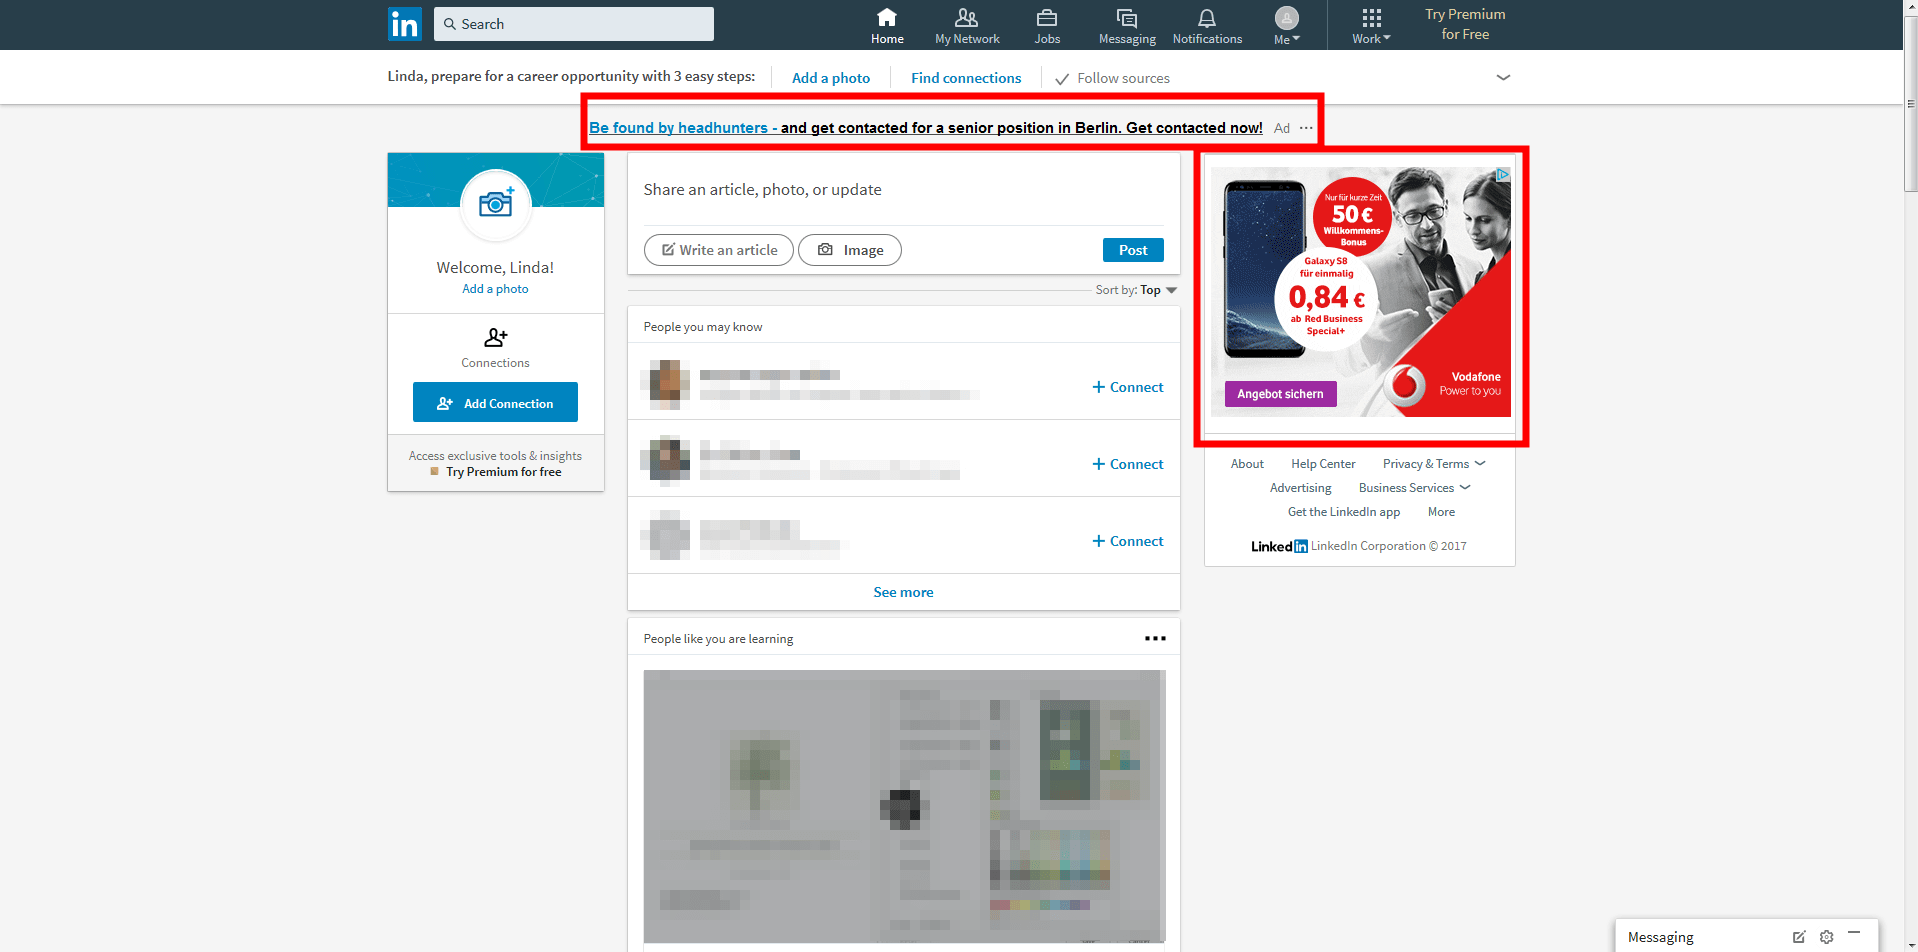 LinkedIn news feed with various advertisements